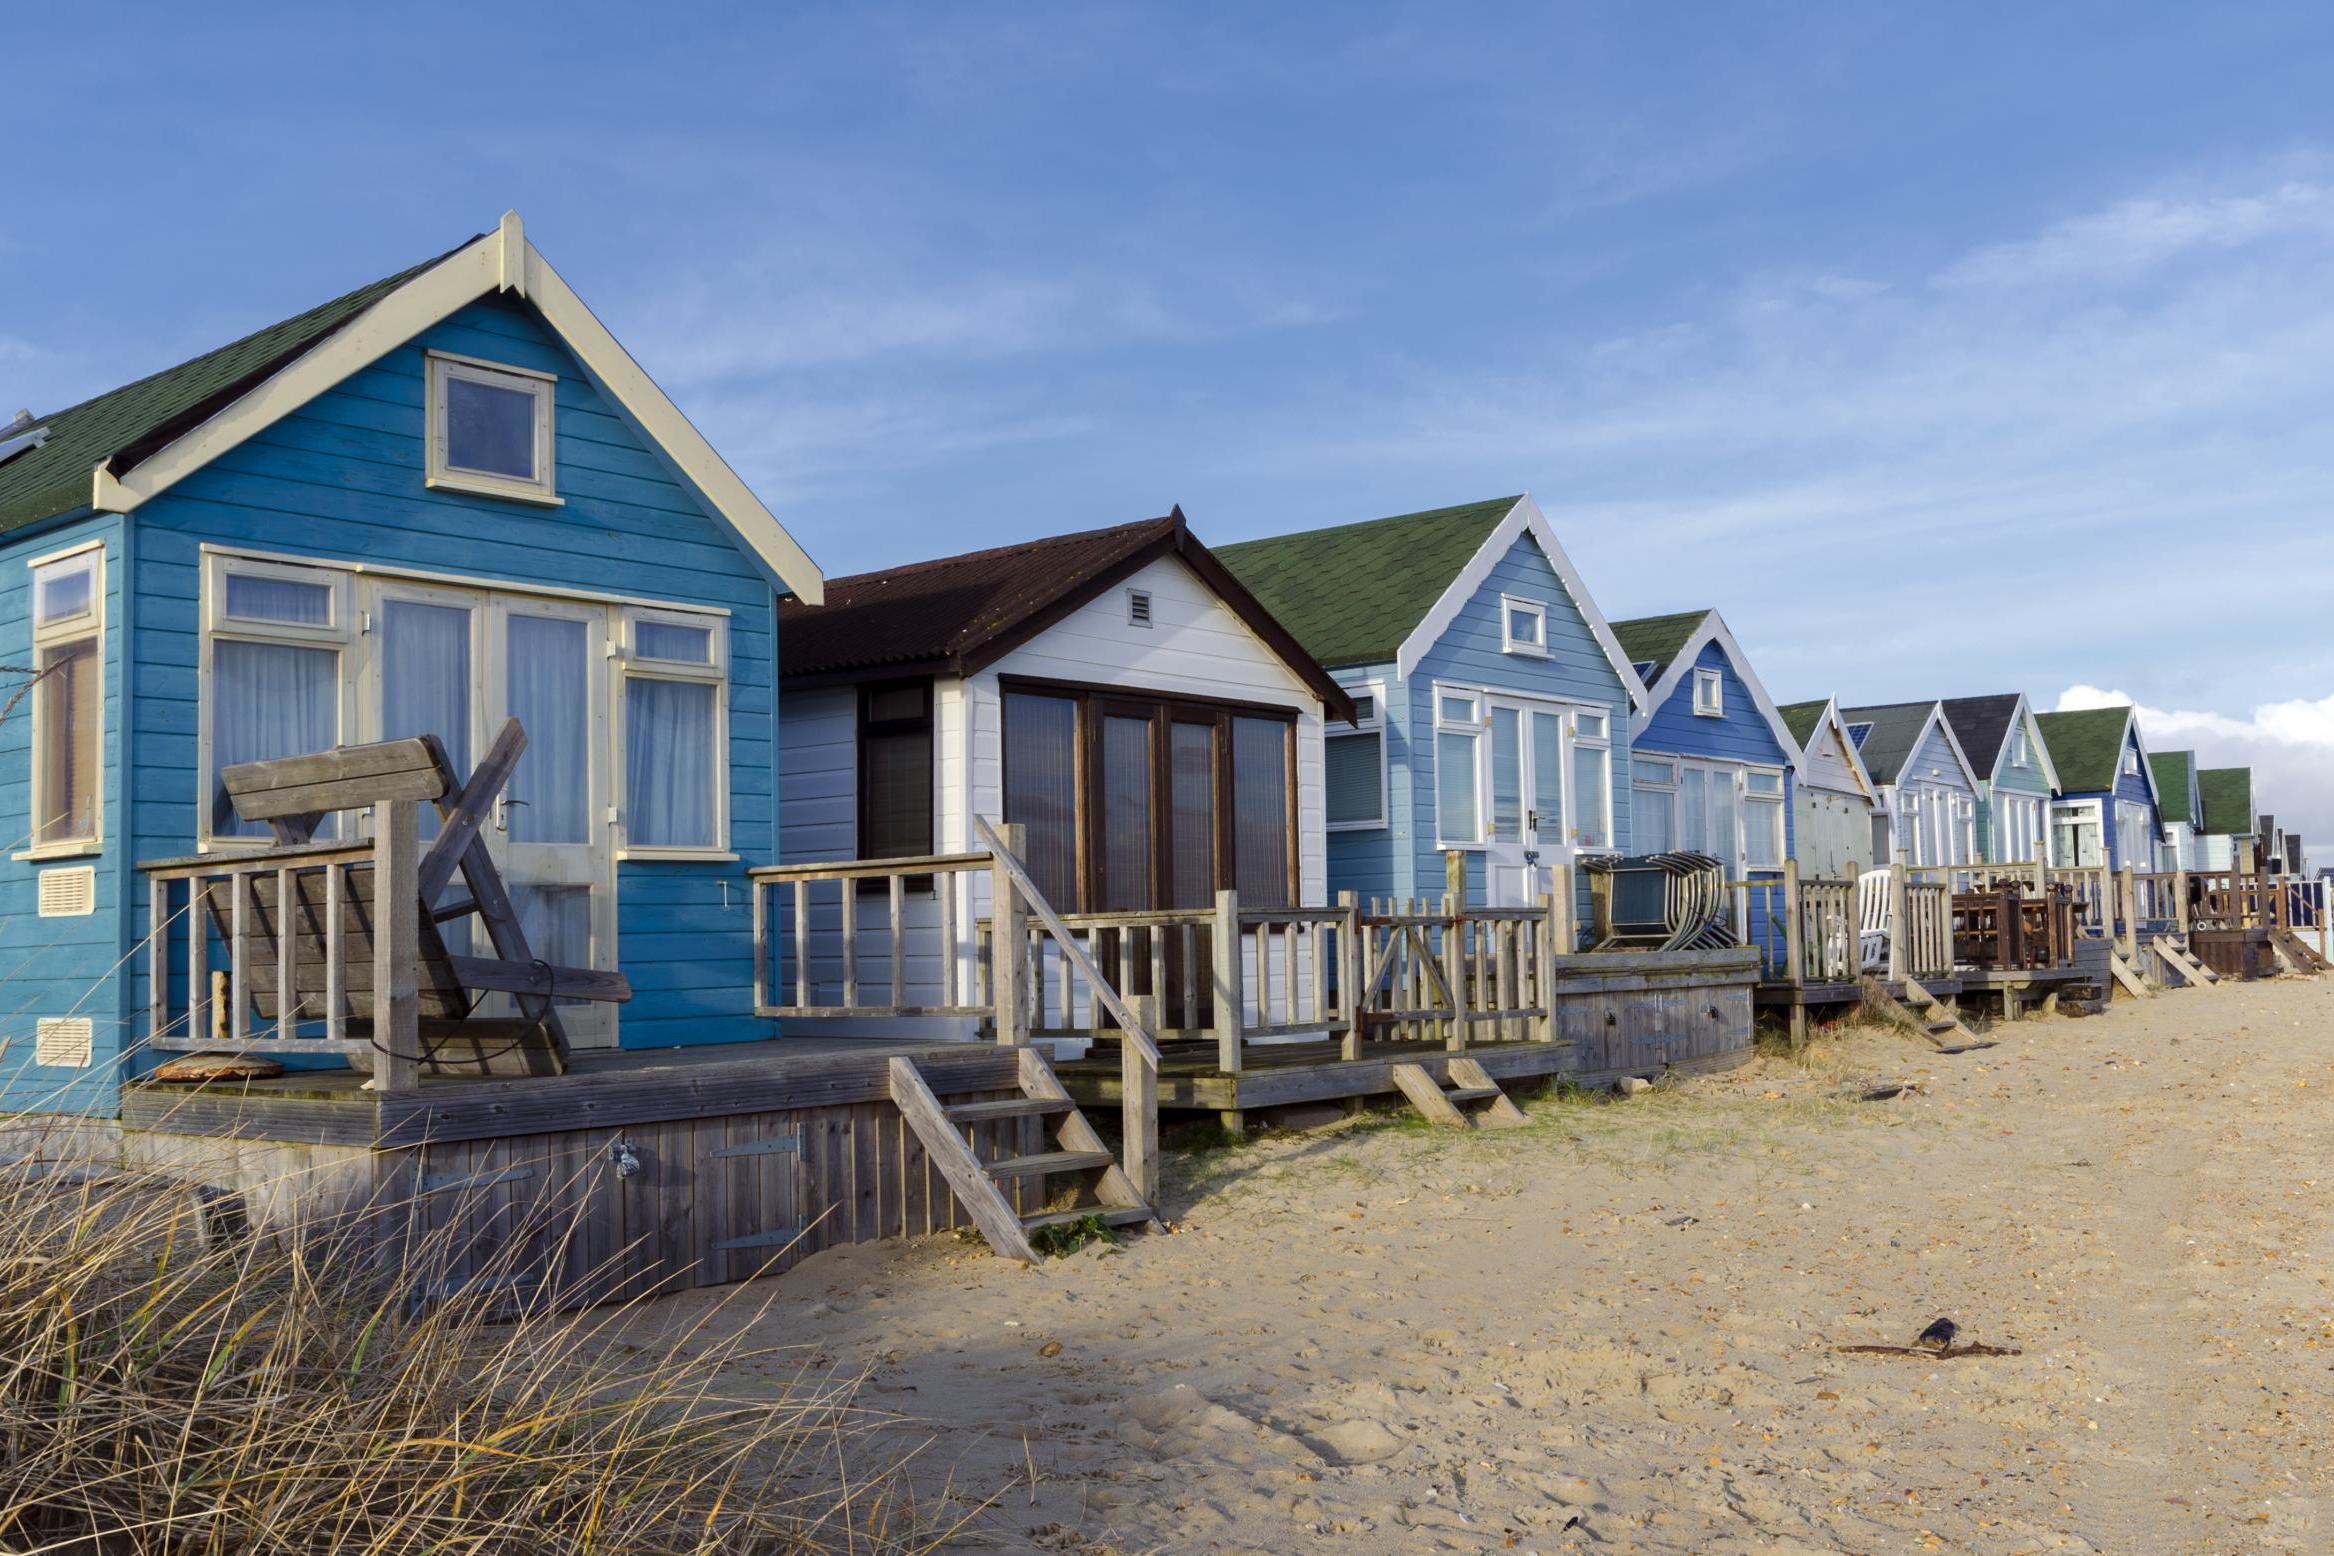 A selection of beach huts on the desirable Budeford spit